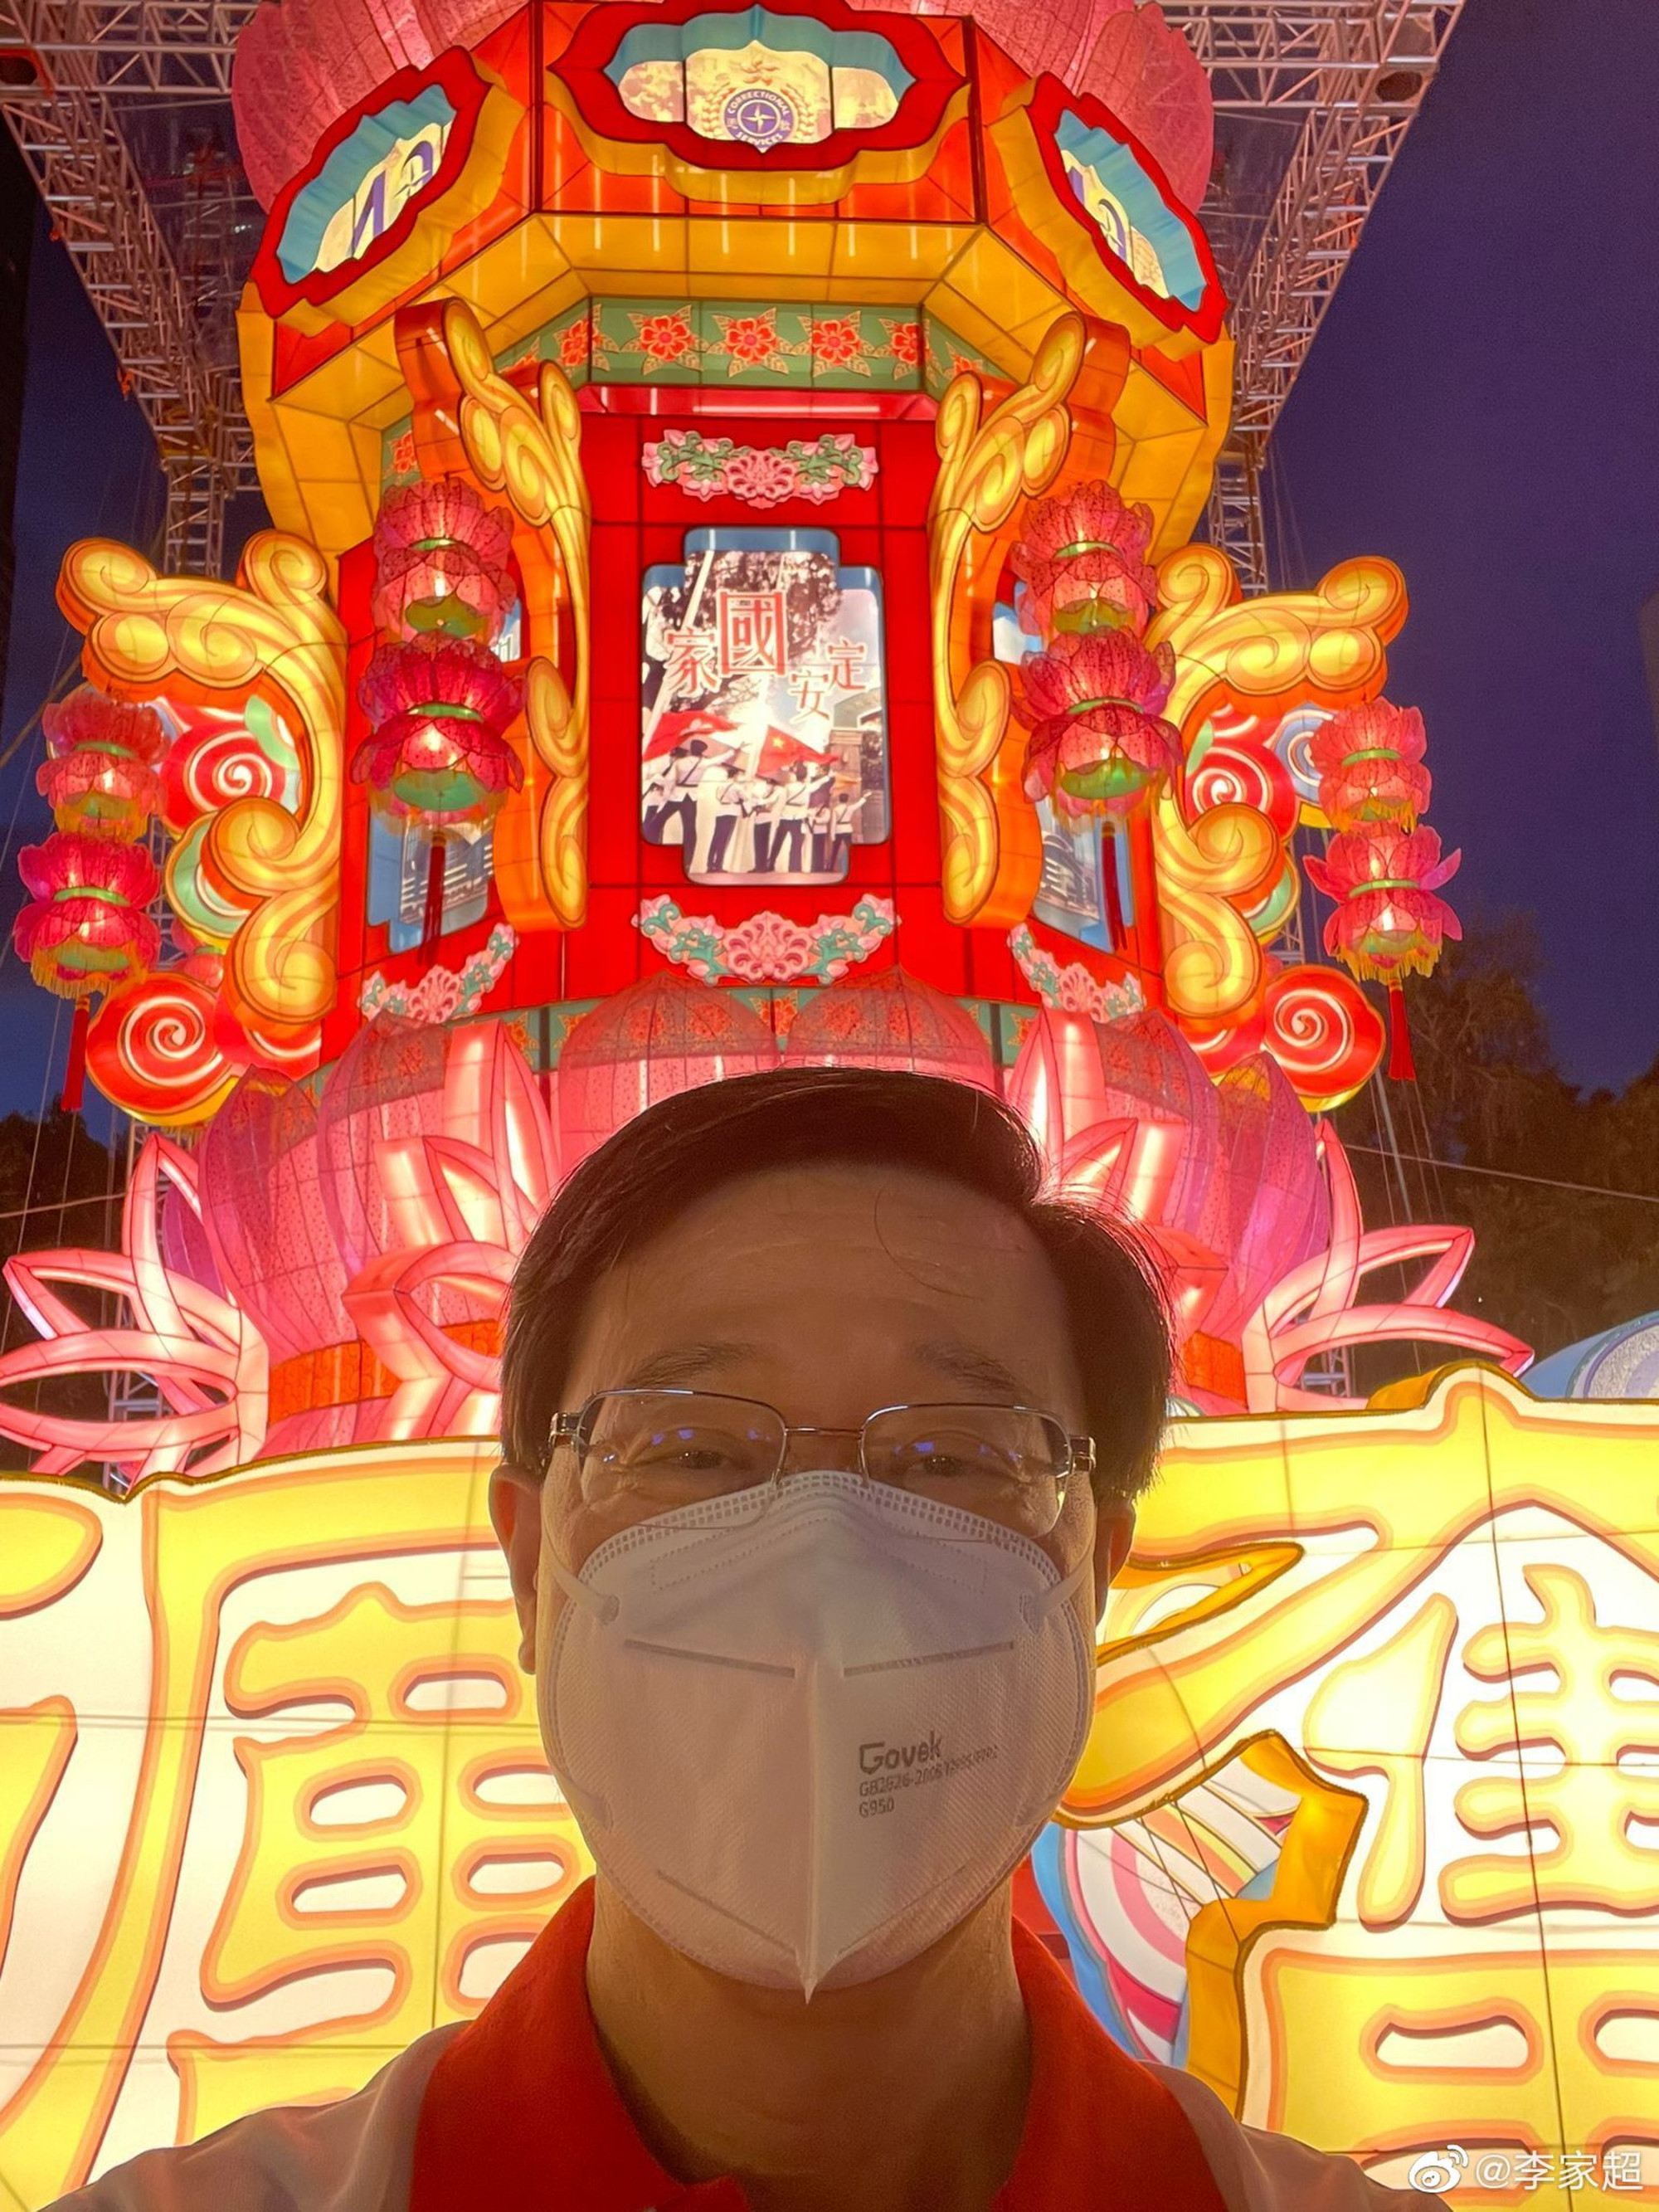 When John Lee posted a selfie posing with a giant lantern, Guangdong-based follower “ChanchanbabyHK” said: “I feel extremely privileged to be part of the chief executive’s circle of friends.” Photo: Weibo